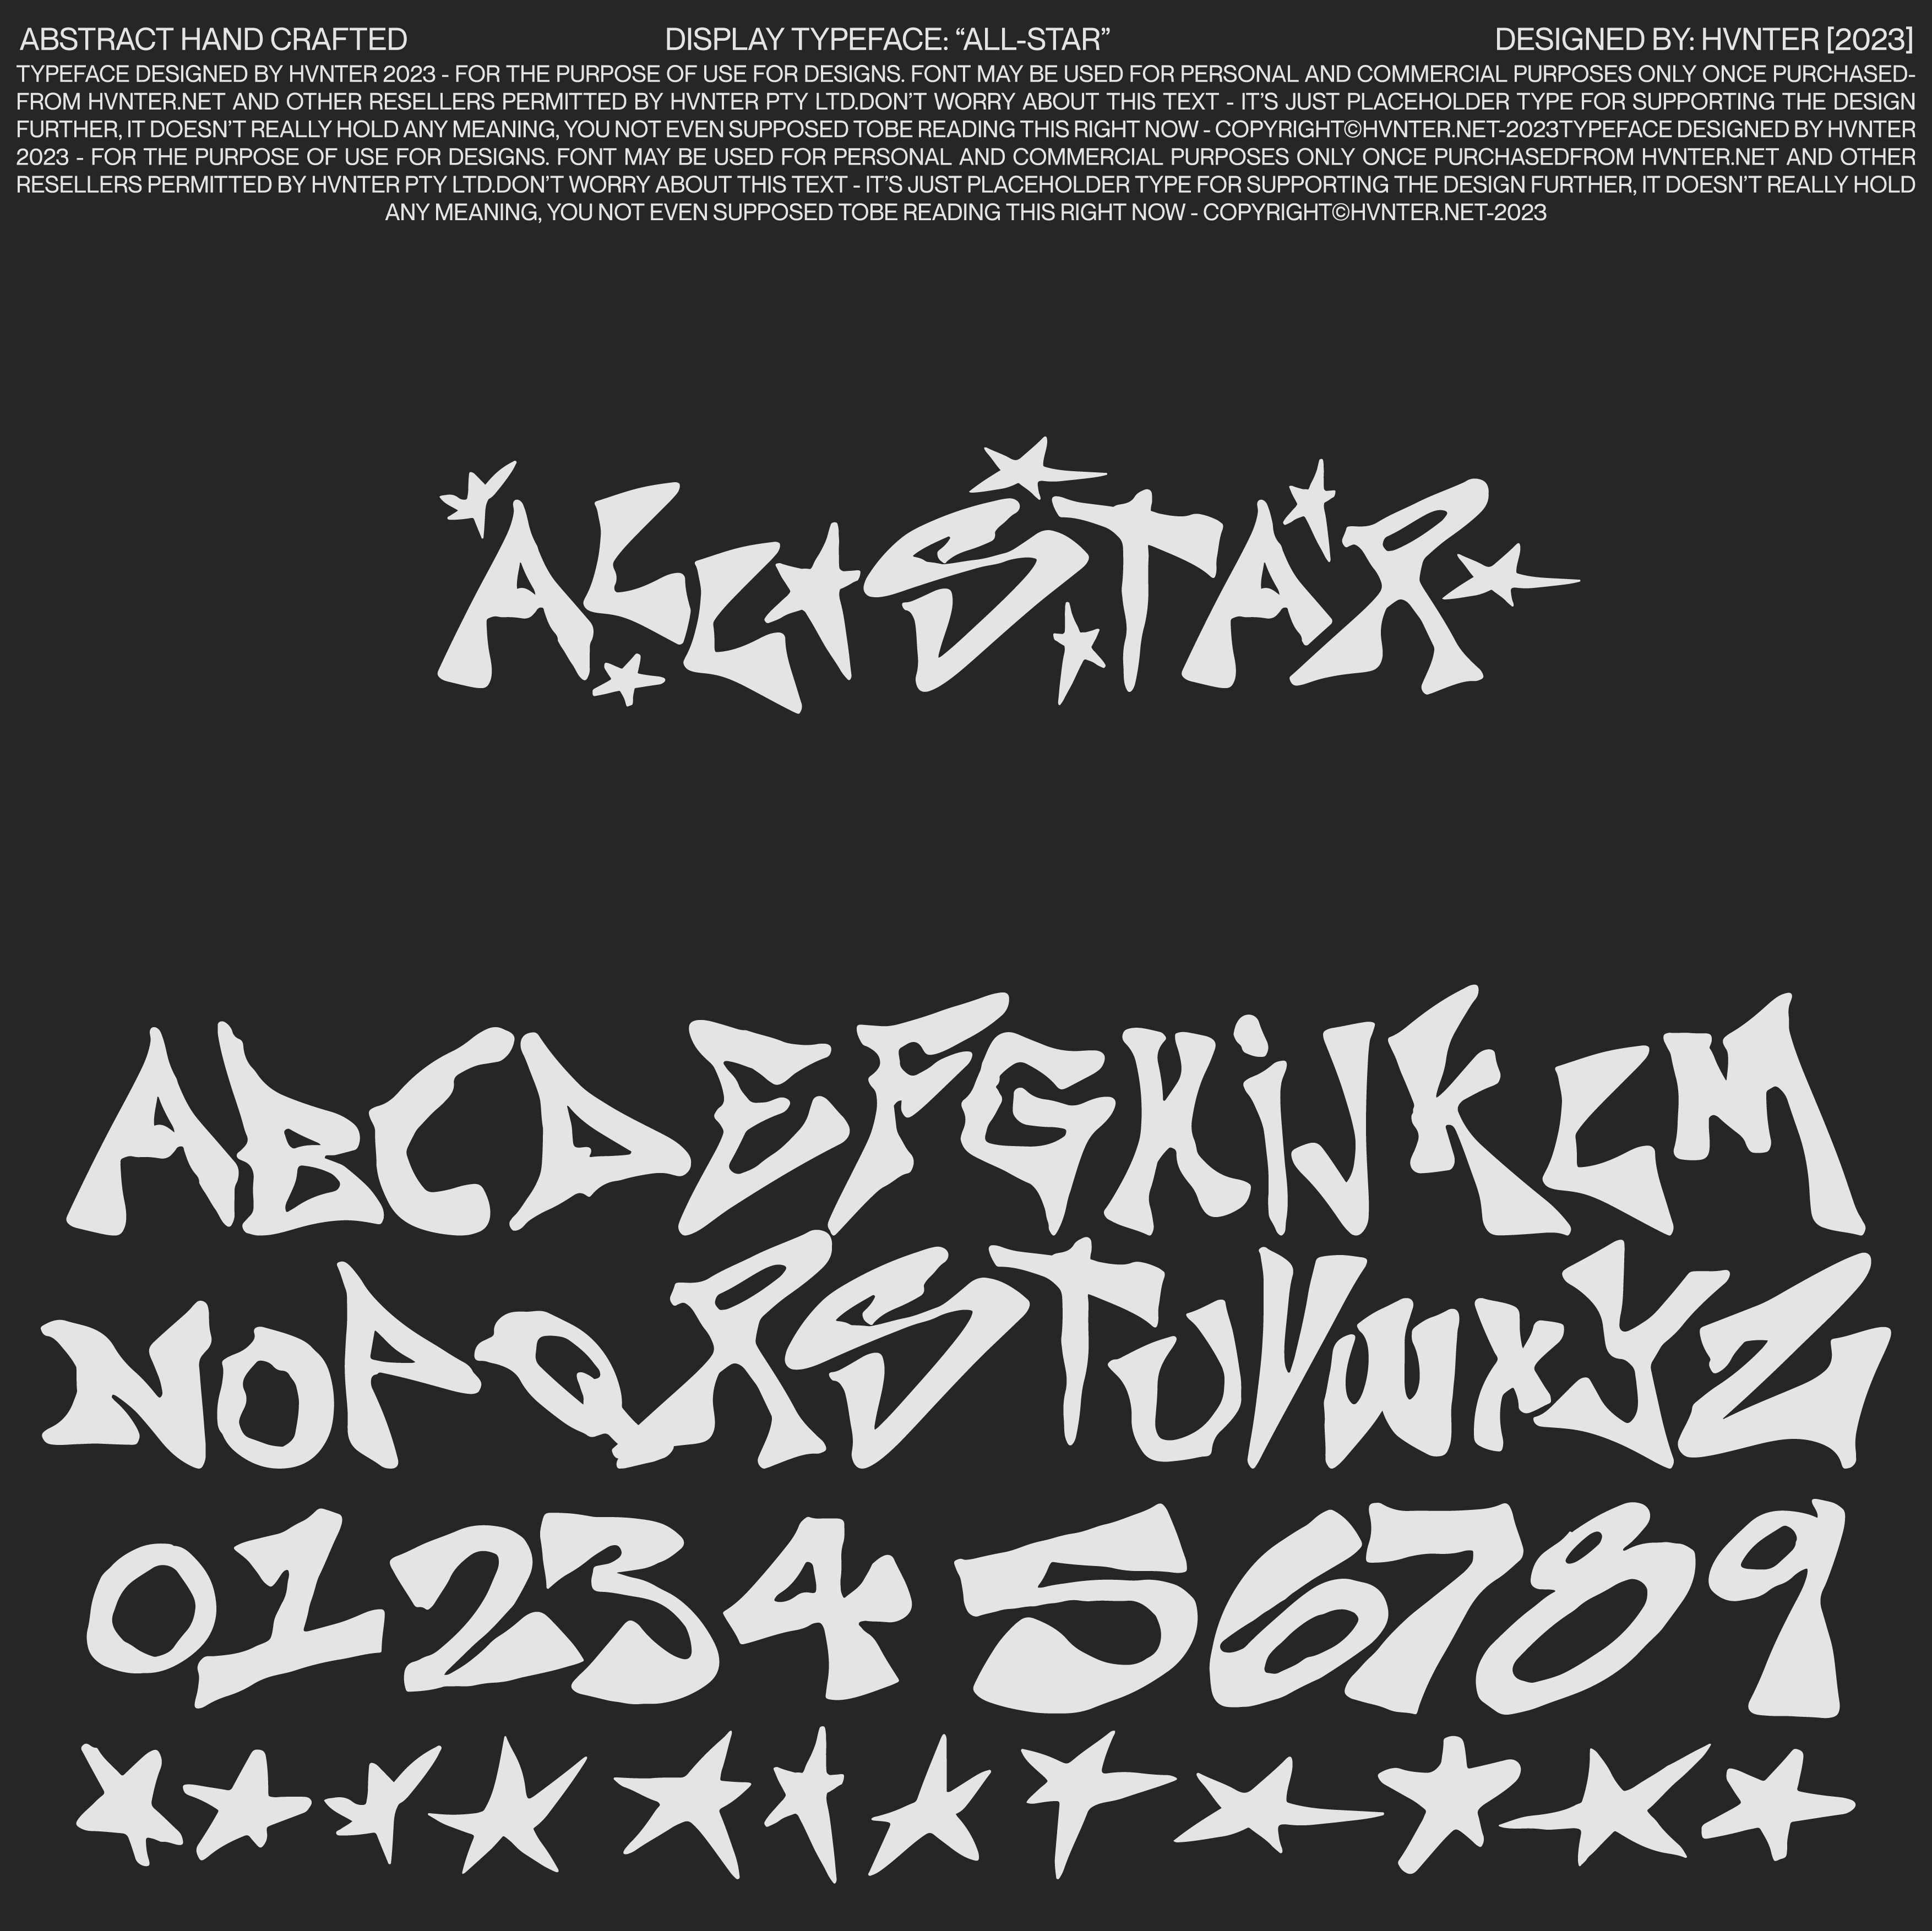 All-Star Display Typeface